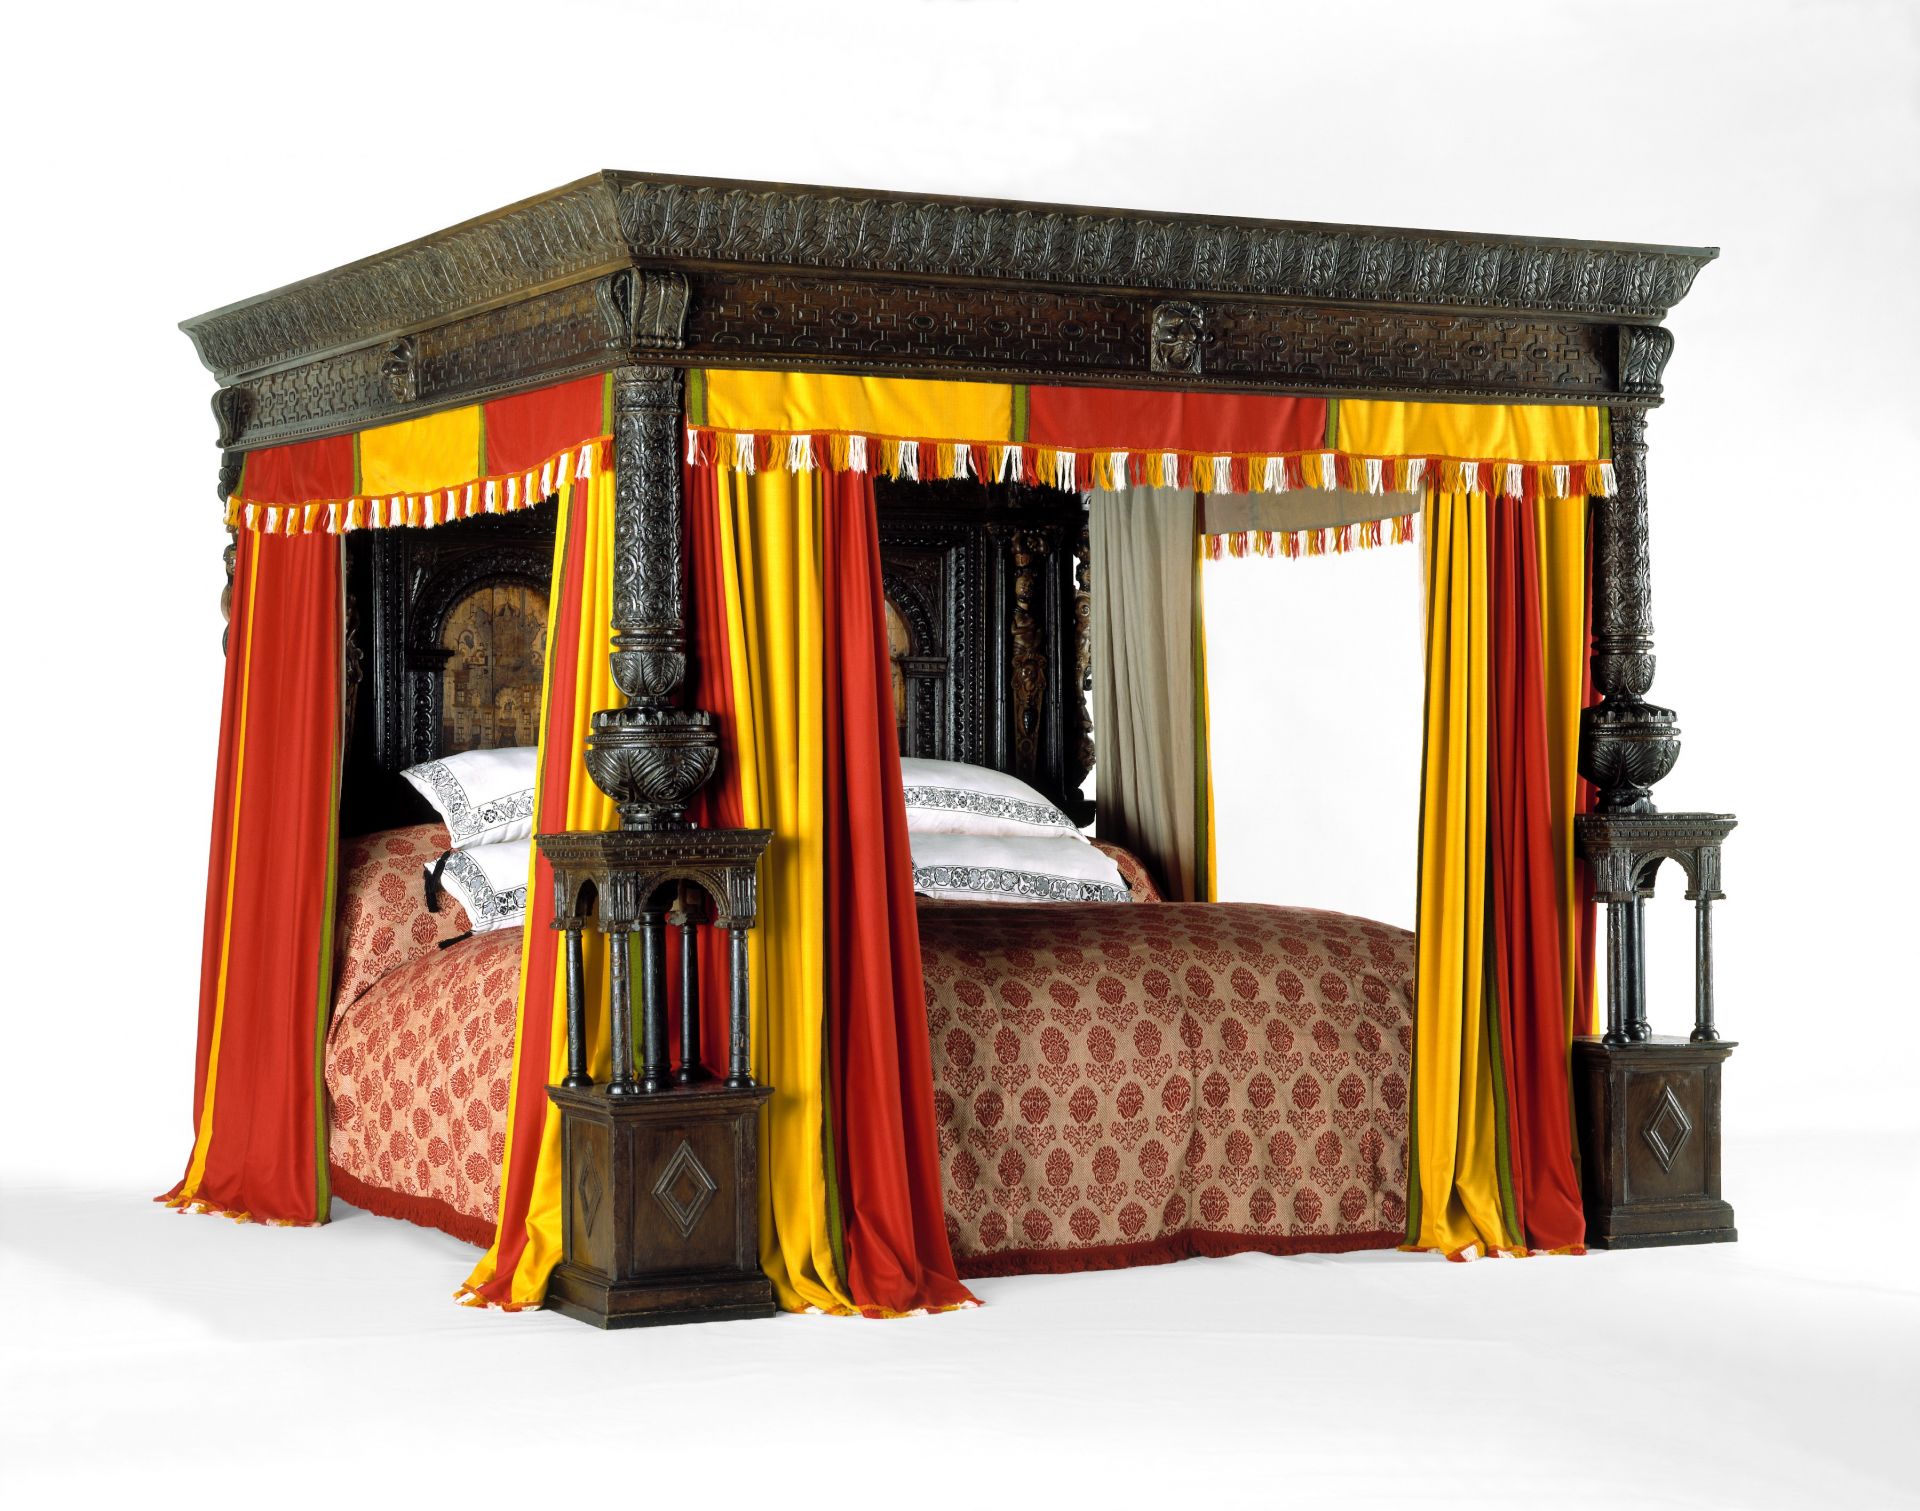 Victoria & Albert Museum _ 'The Great Bed of Ware', carved oak bed, probably from Ware, Hertfordshire, UK, about 1590.